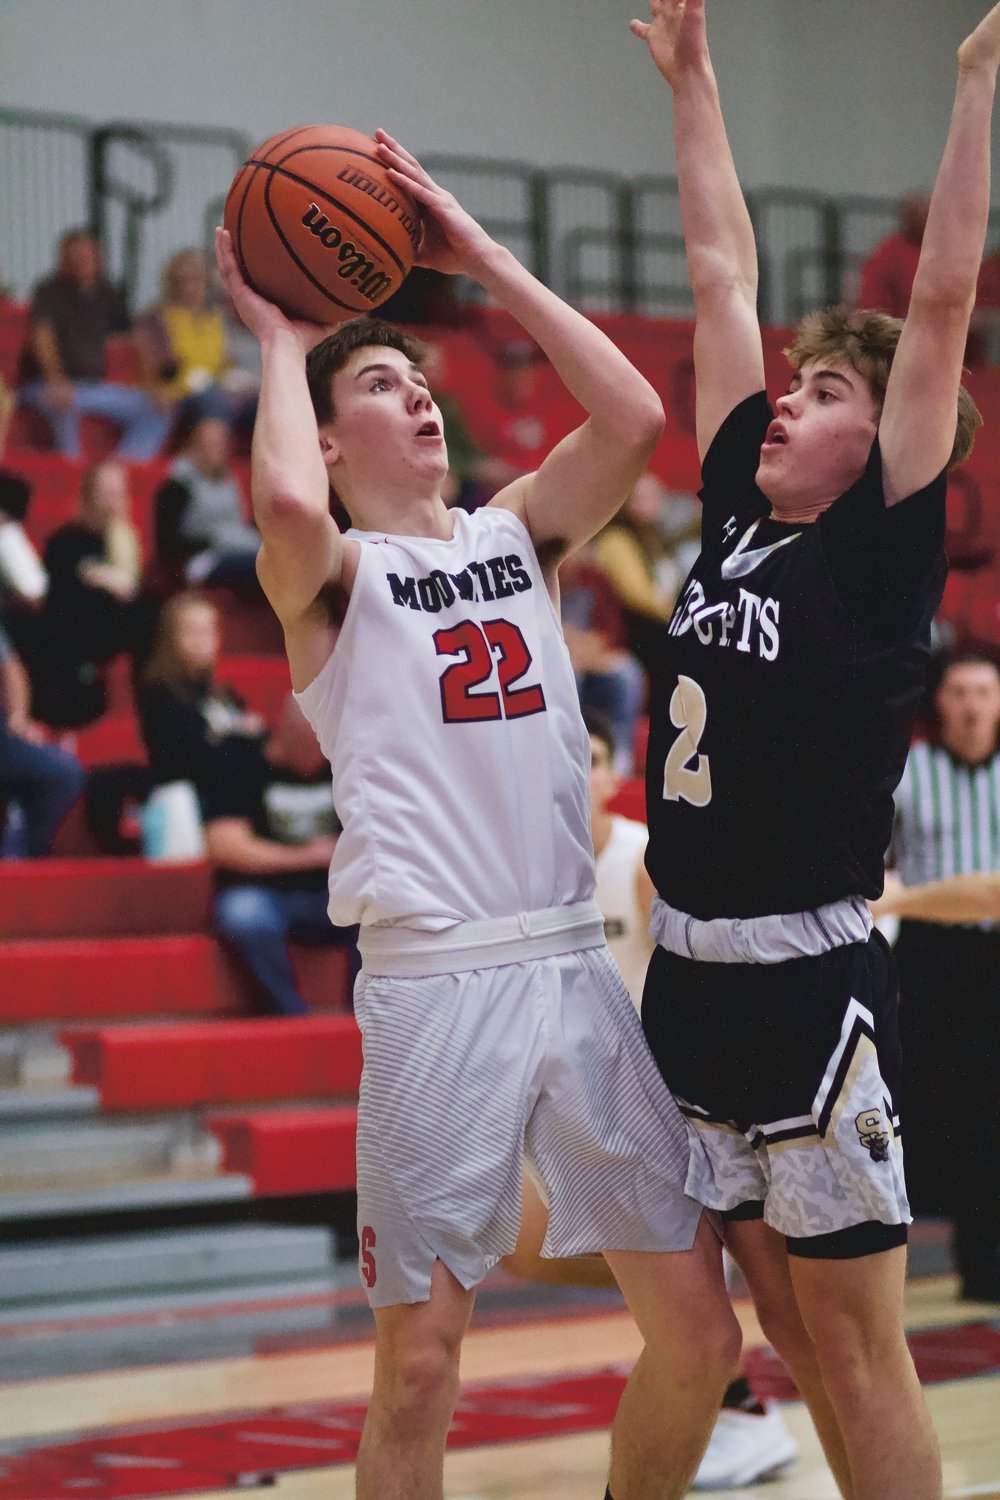 Southmont's Logan Oppy scored seven points in the Mountie's opening season loss to South Vermillion on Tuesday.